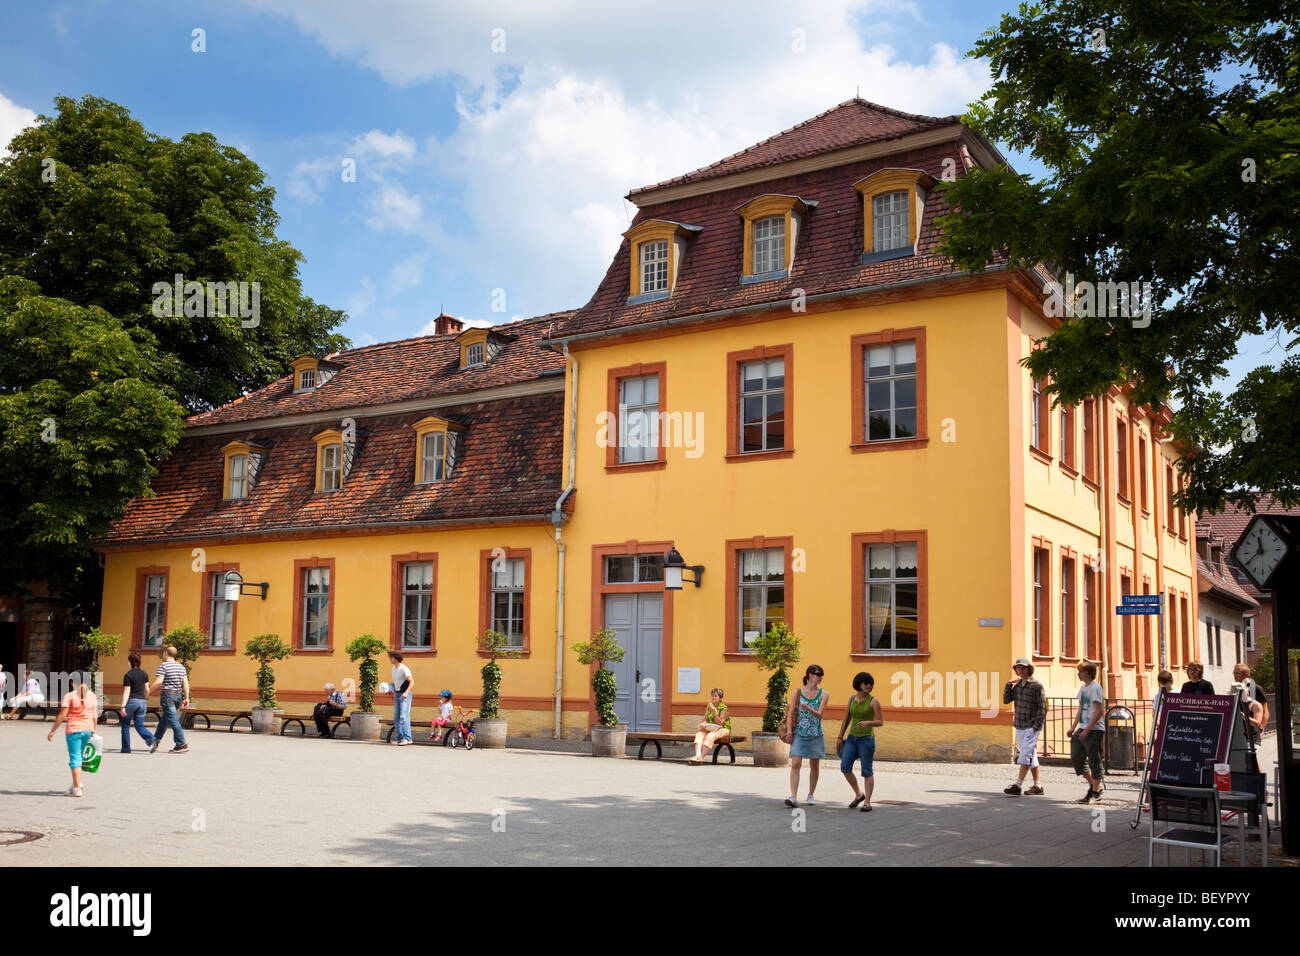 Widows Palace in Weimar, Thuringia, Germany, Europe Stock Photo